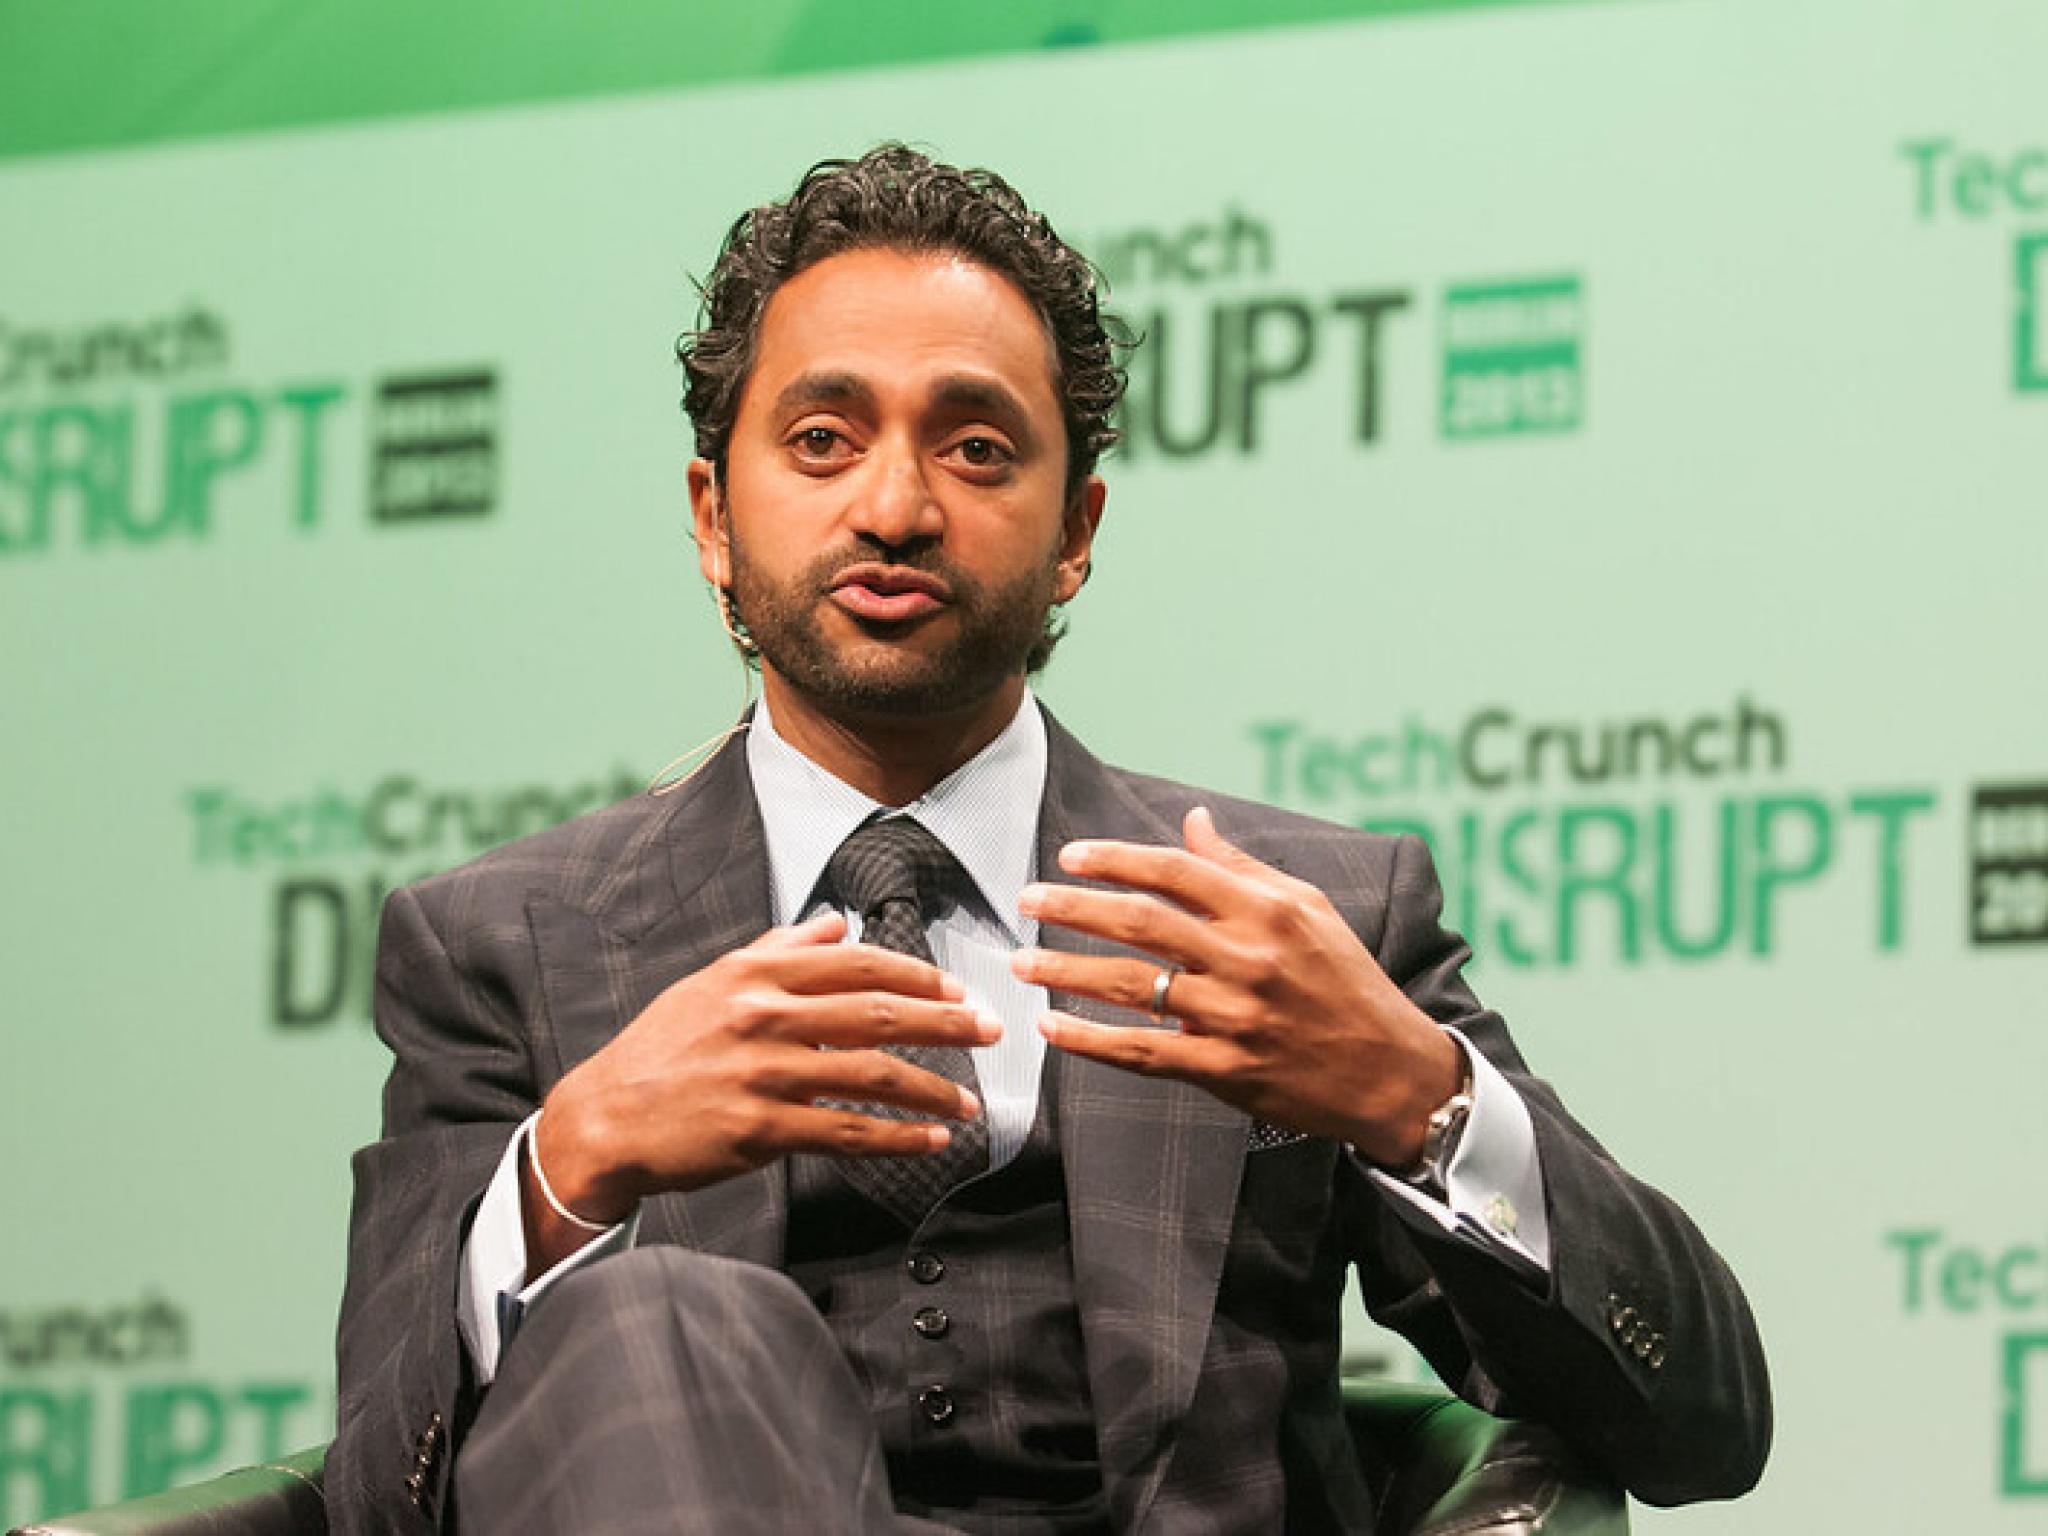  2-chamath-palihapitiya-spac-deals-rumored-will-he-land-the-years-first-deal-once-again 